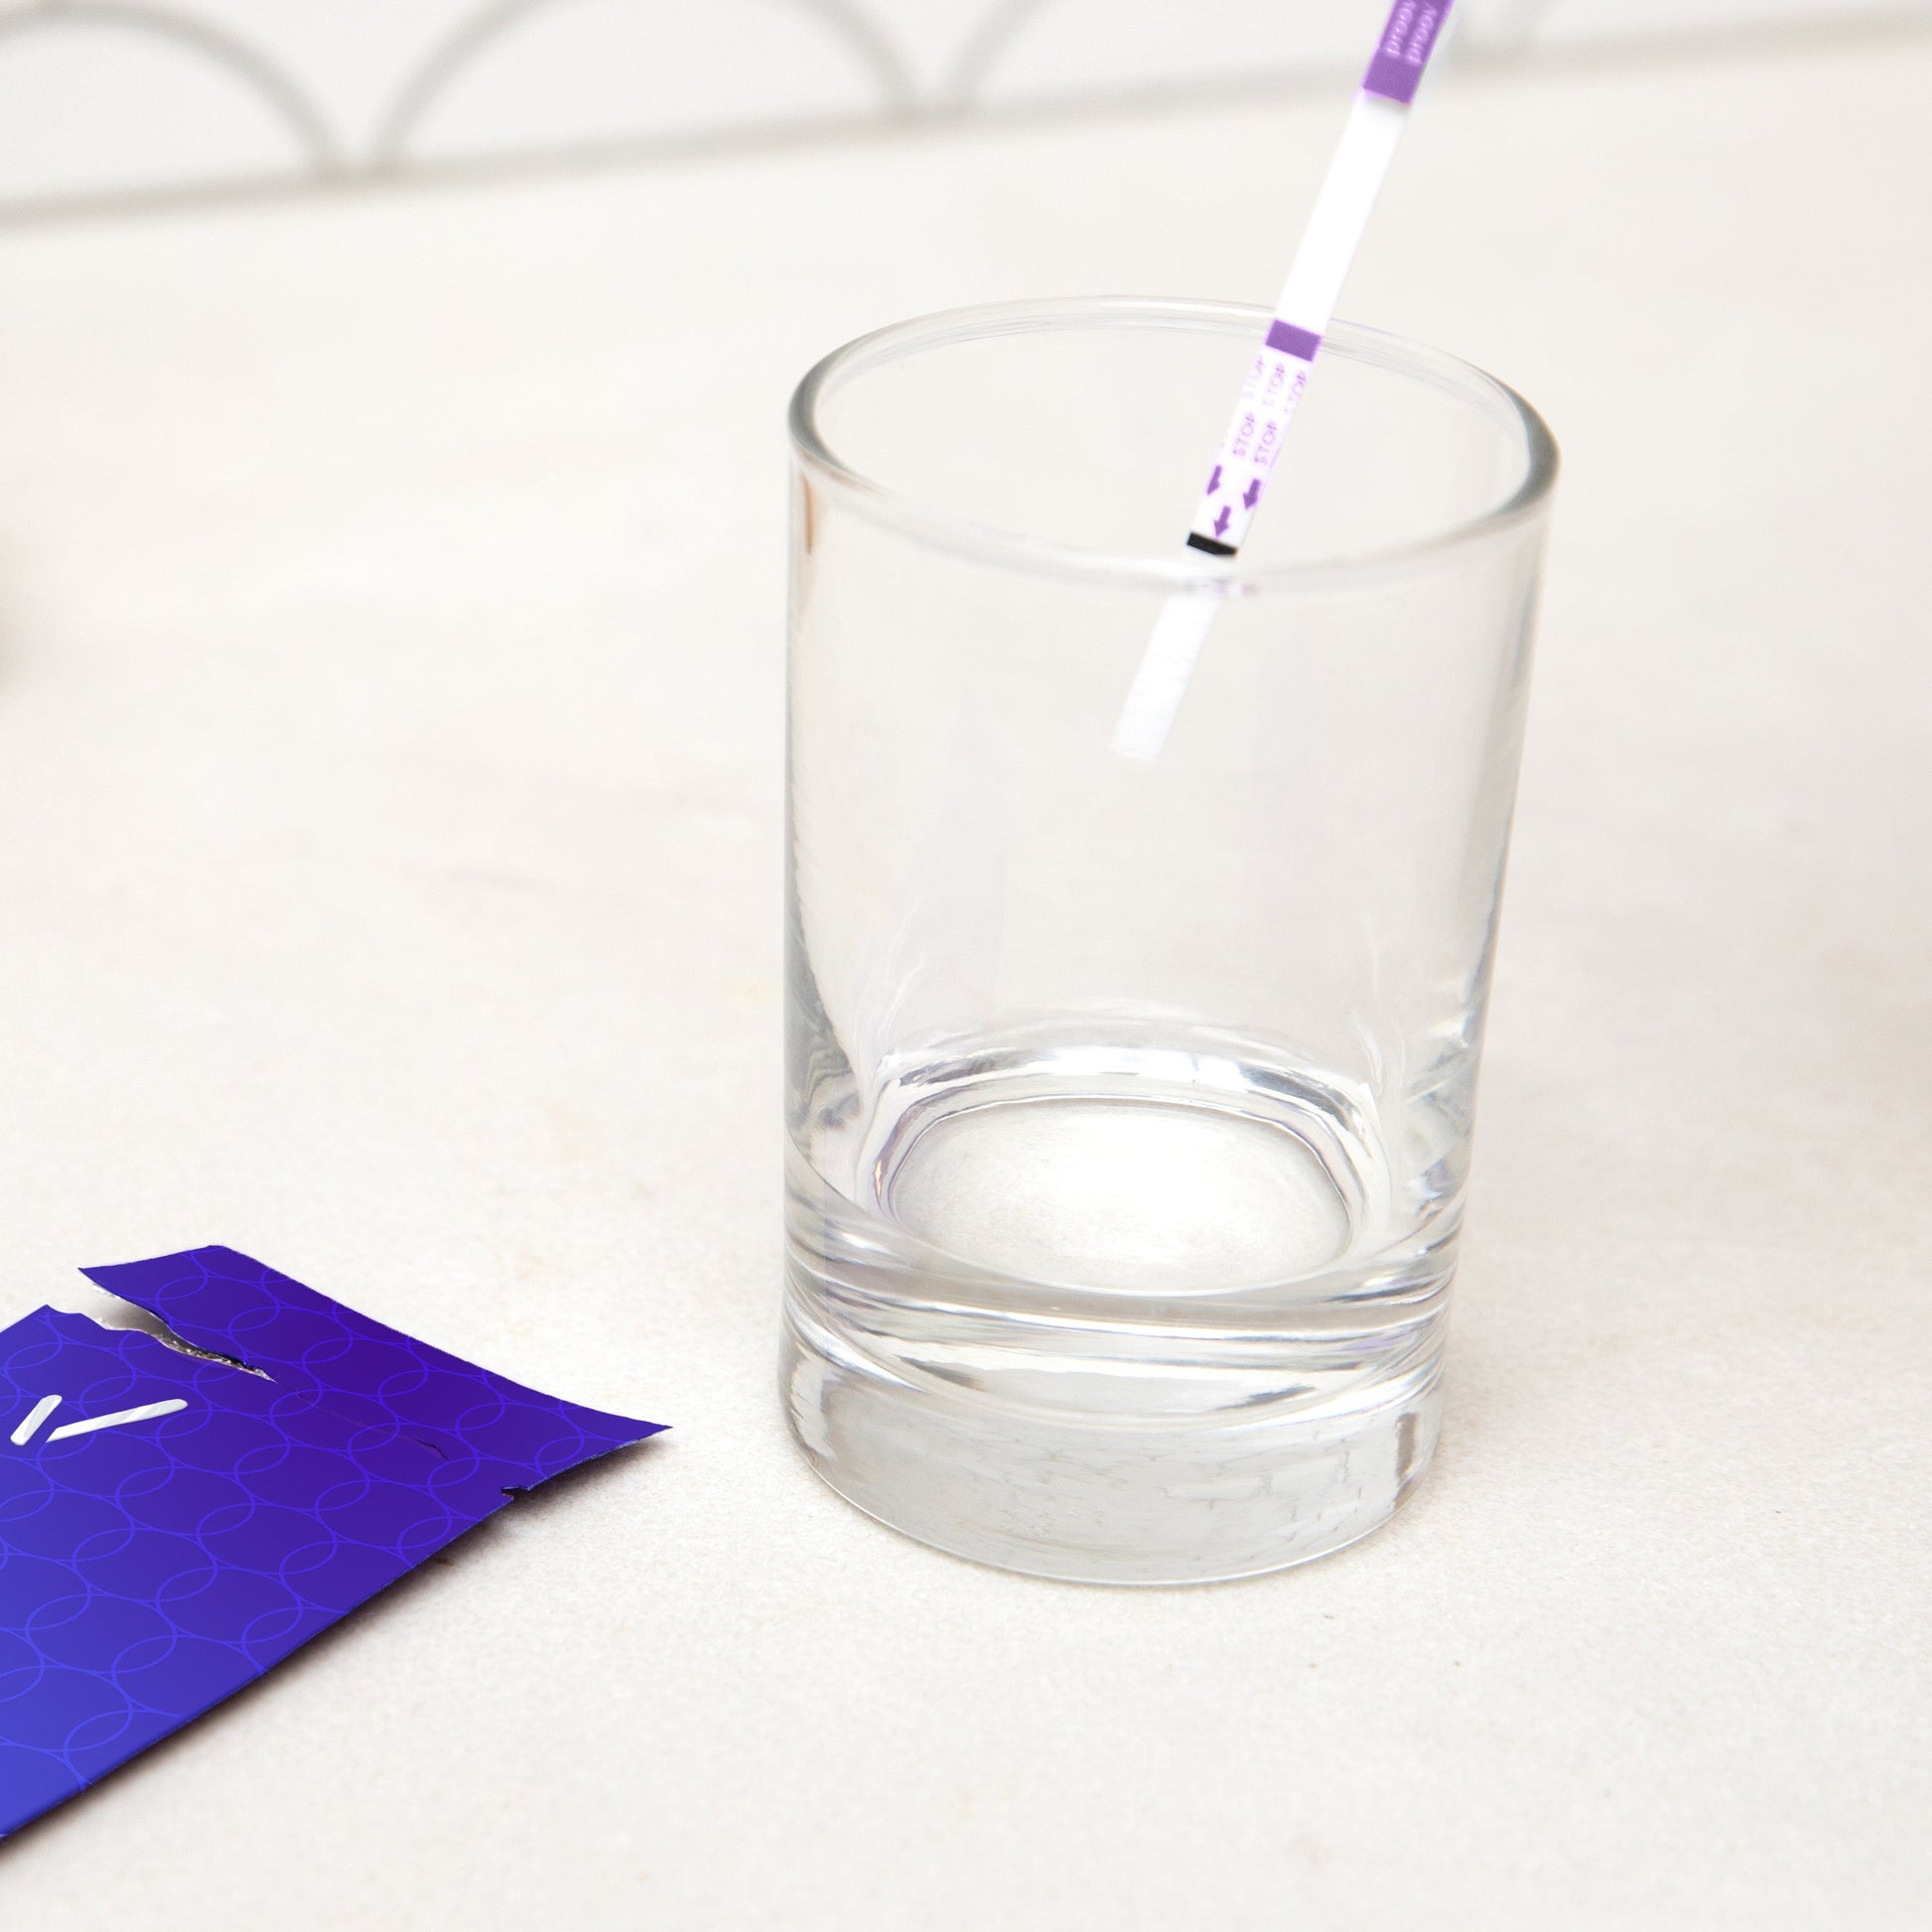 Proov Fertility Test and glass with liquid